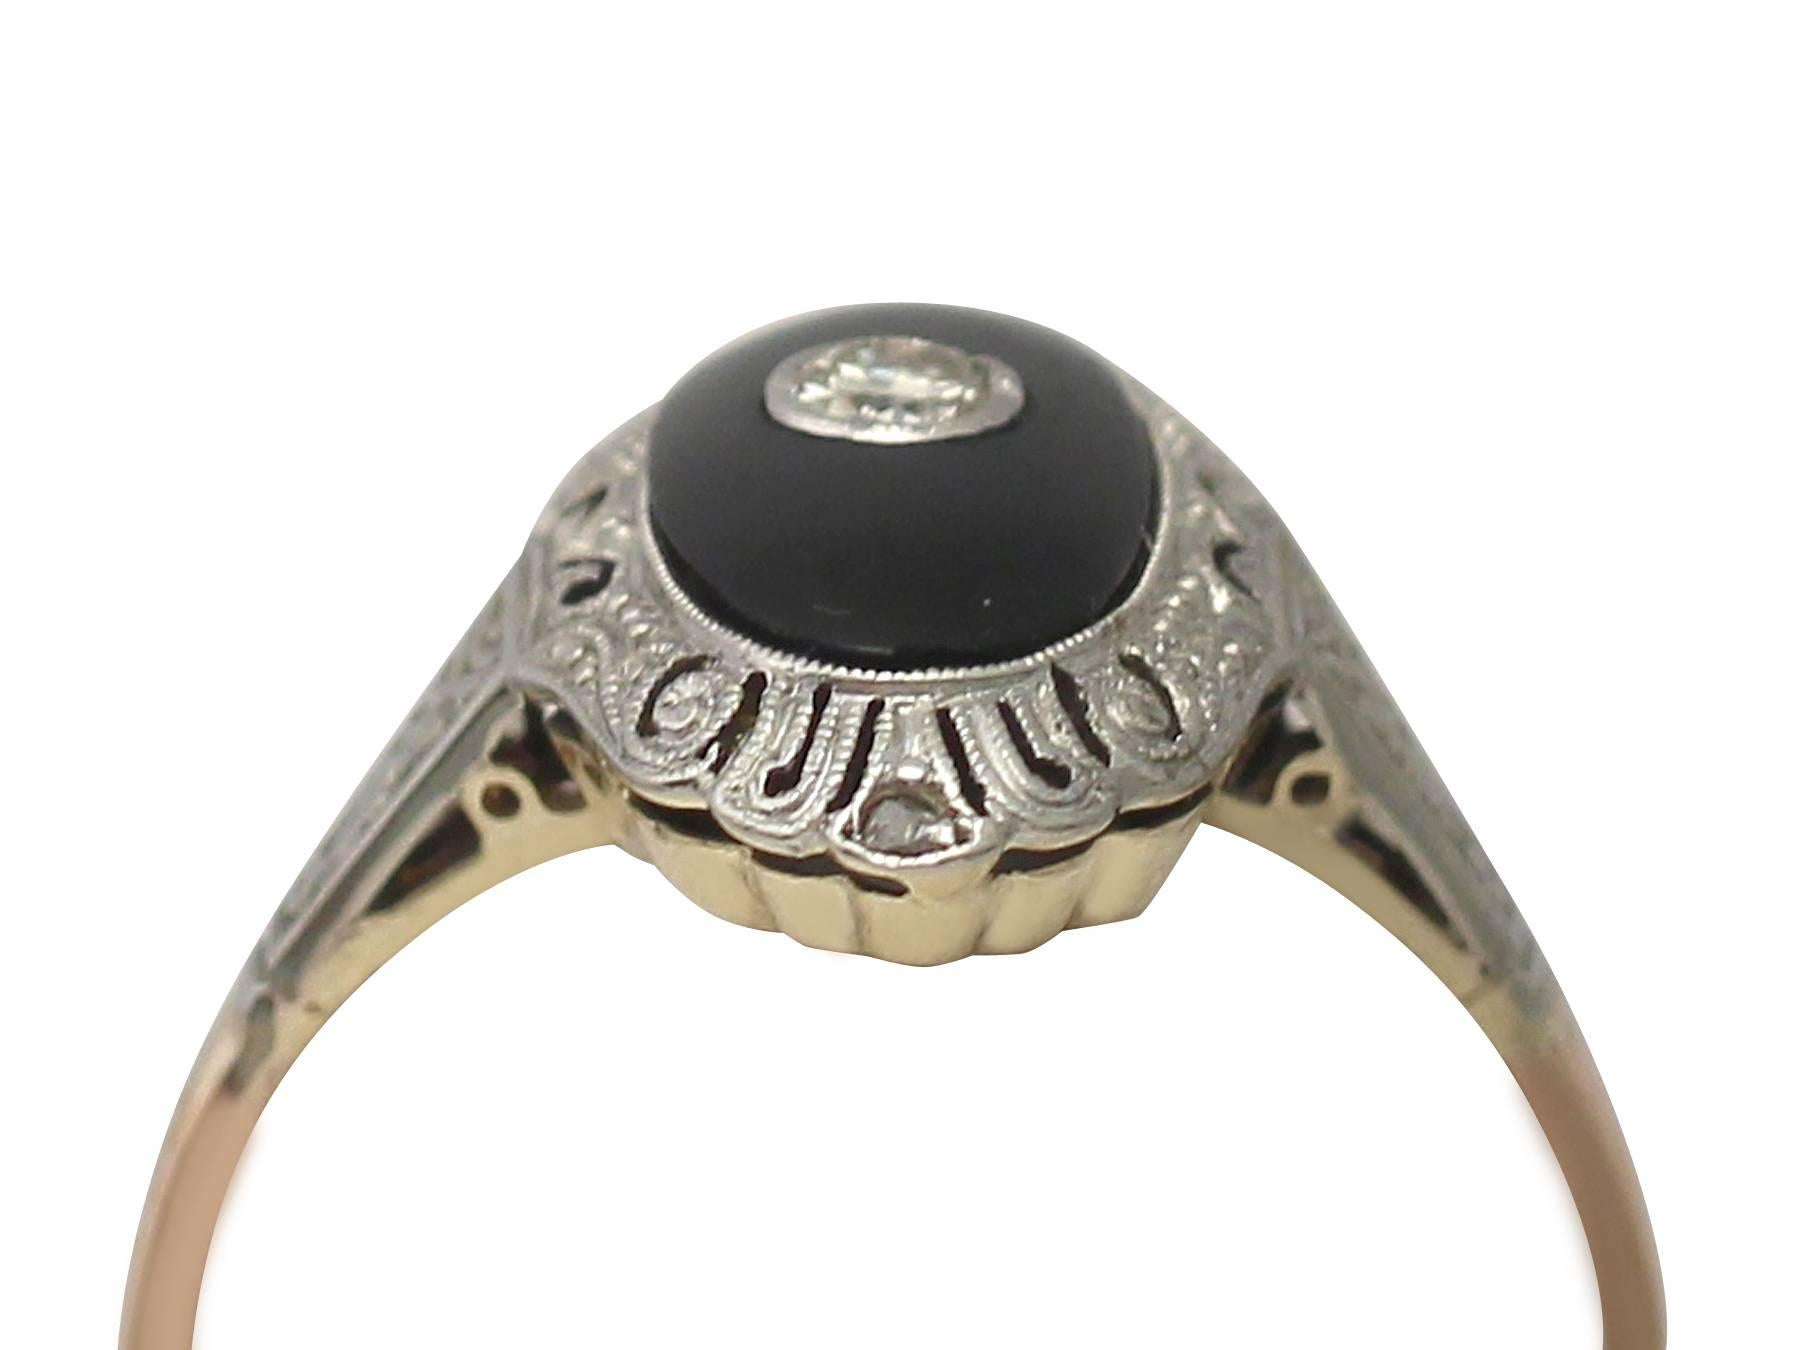 This fine and impressive black onyx and diamond ring has been crafted in 14k yellow gold, with a 14k white gold setting and a 14k rose gold shank.

The pierced decorated oval shaped mount displays a black onyx panel ornamented with a bezel set 0.38